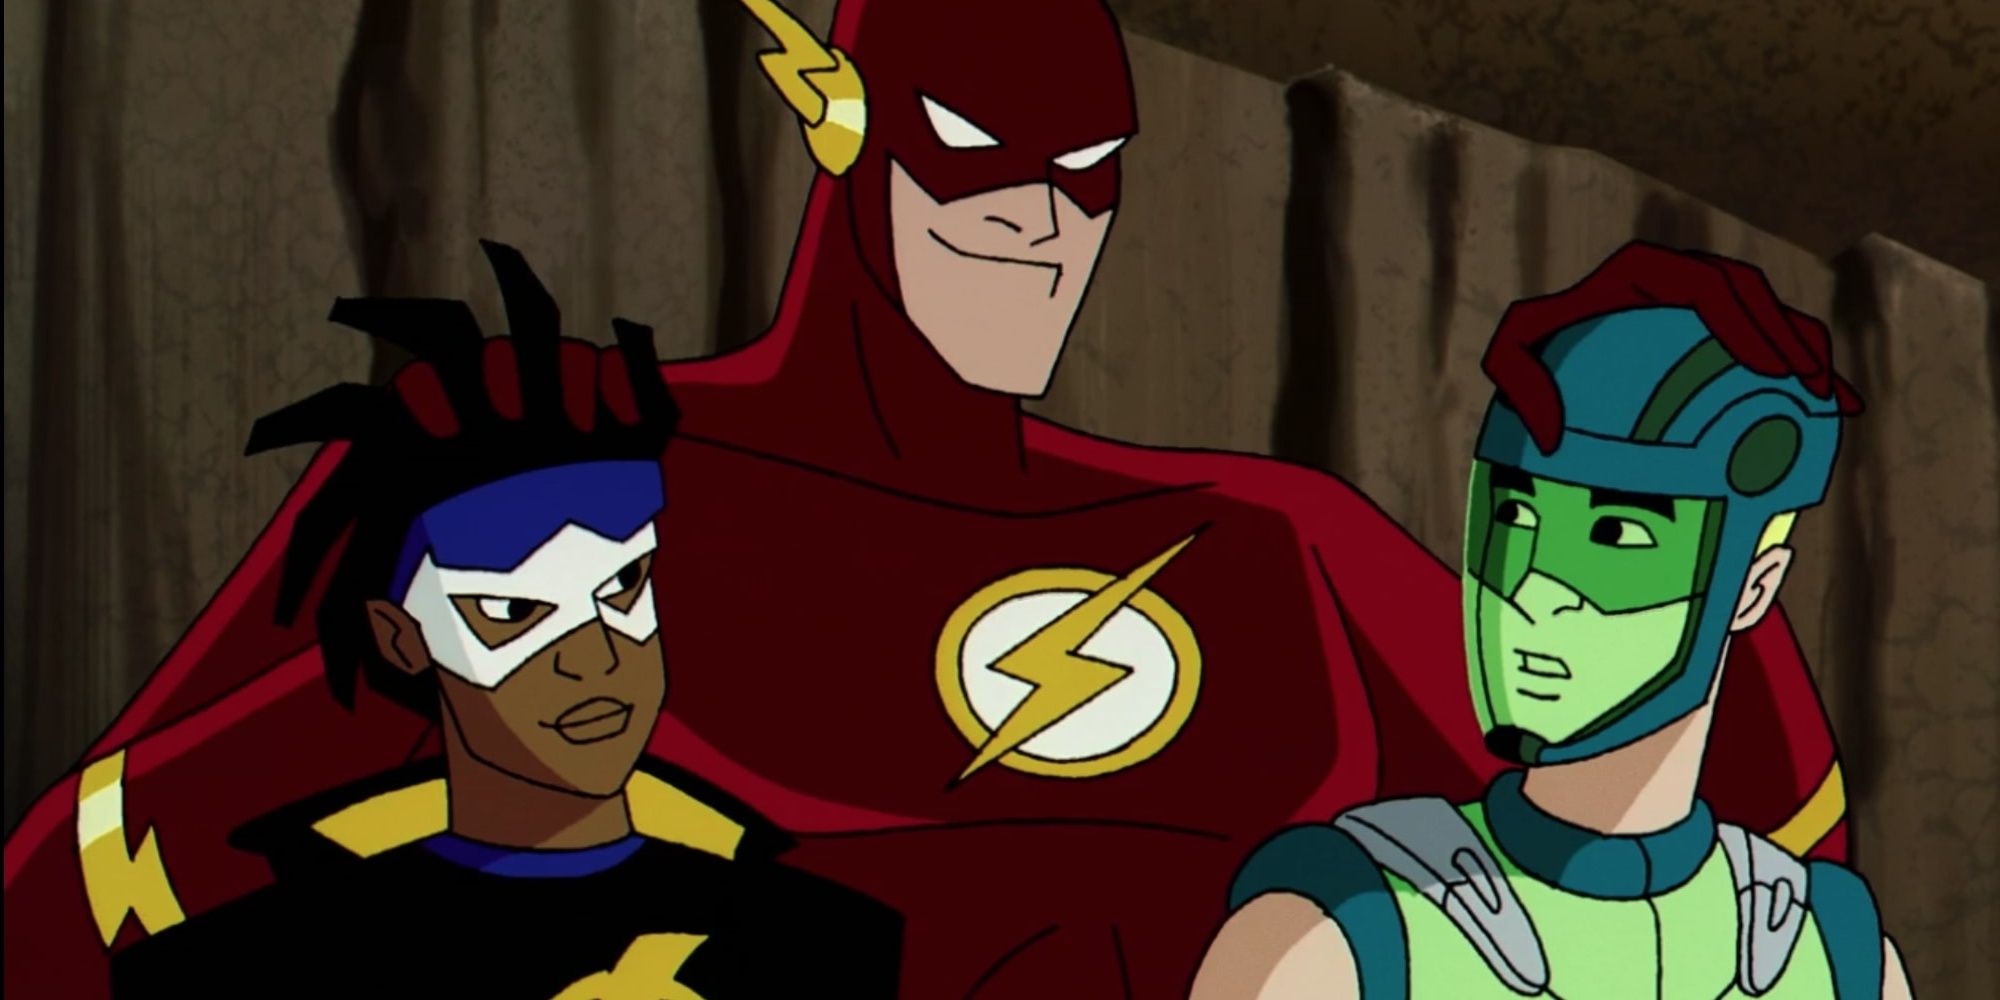 Flash from Justice League pets the heads of Virgil and Richie from Static Shock